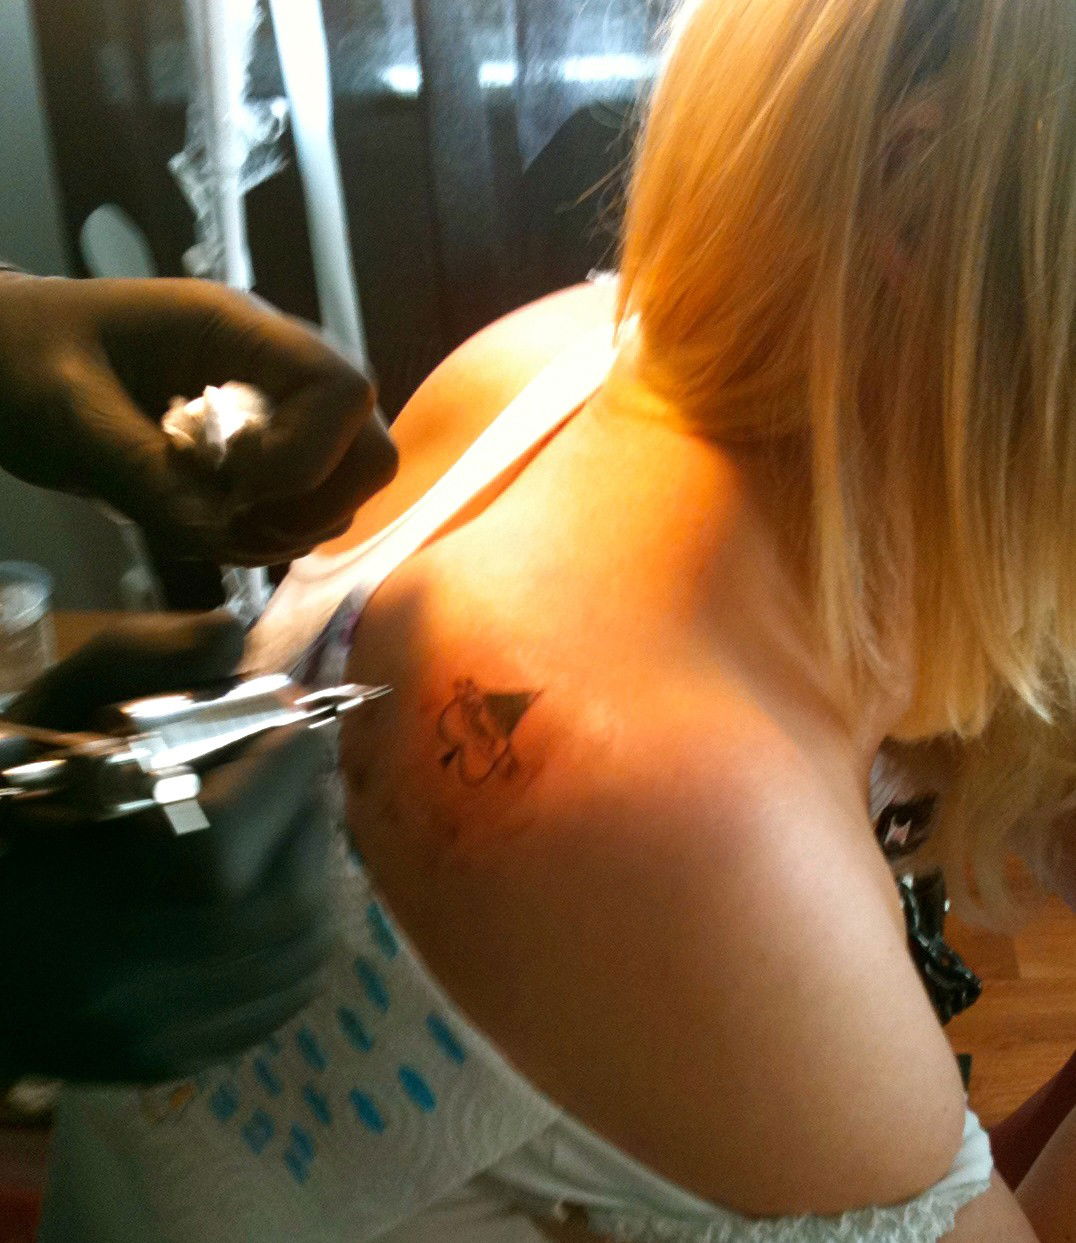 Photo by blond66 with the username @blond66,  March 3, 2013 at 1:37 PM and the text says 'greg69sheryl:

A Queen of Spades gets some permanent ink. #tattoo'